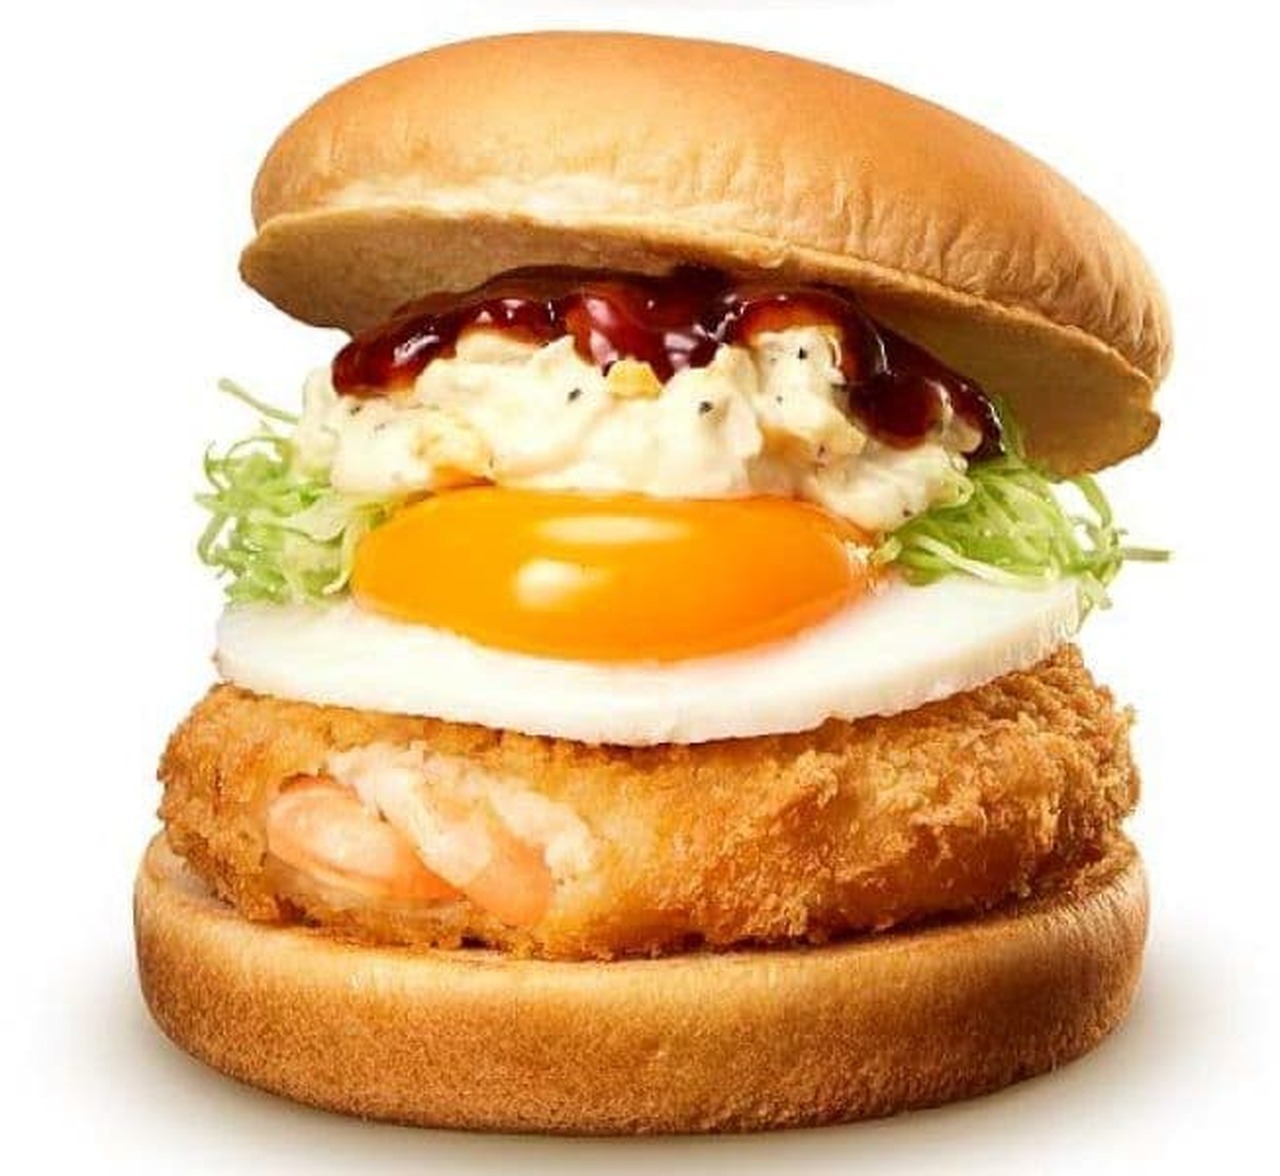 Lotteria "Japanese-style soft-boiled moon-viewing shrimp burger"